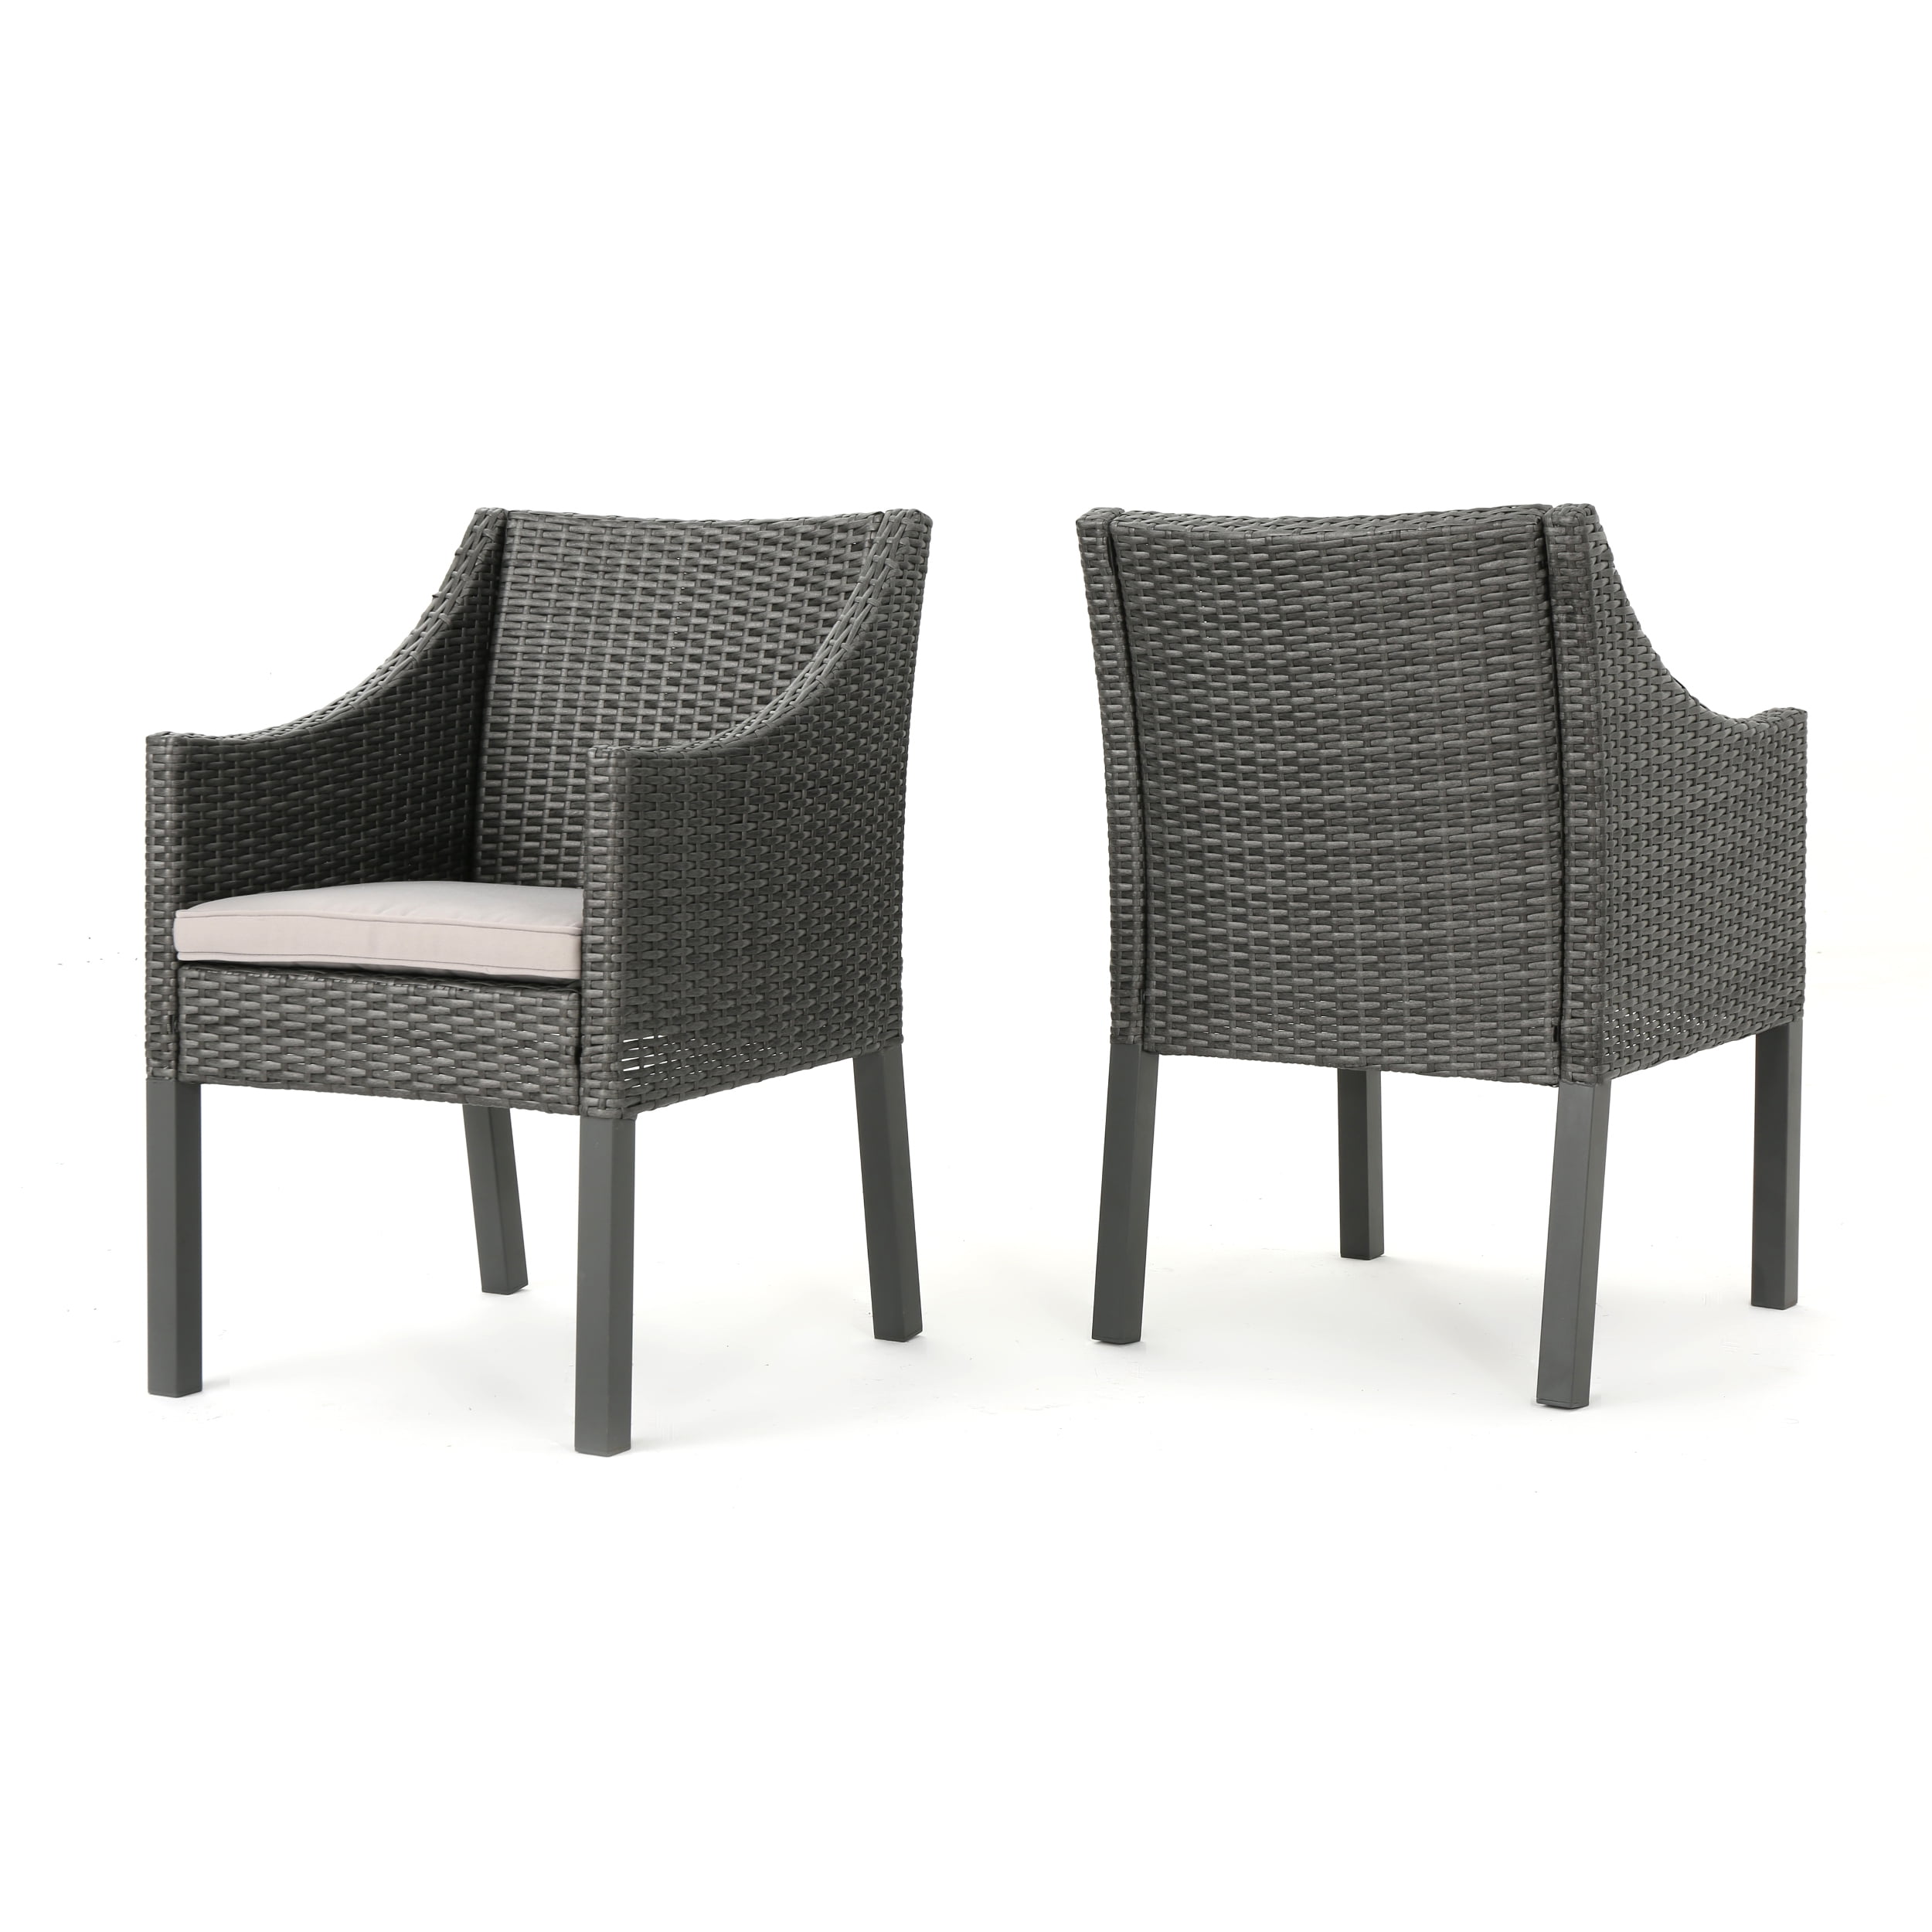 Set of 2 Grey/Silver Antioch Outdoor Wicker Dining Chairs with Water Resistant Cushions 